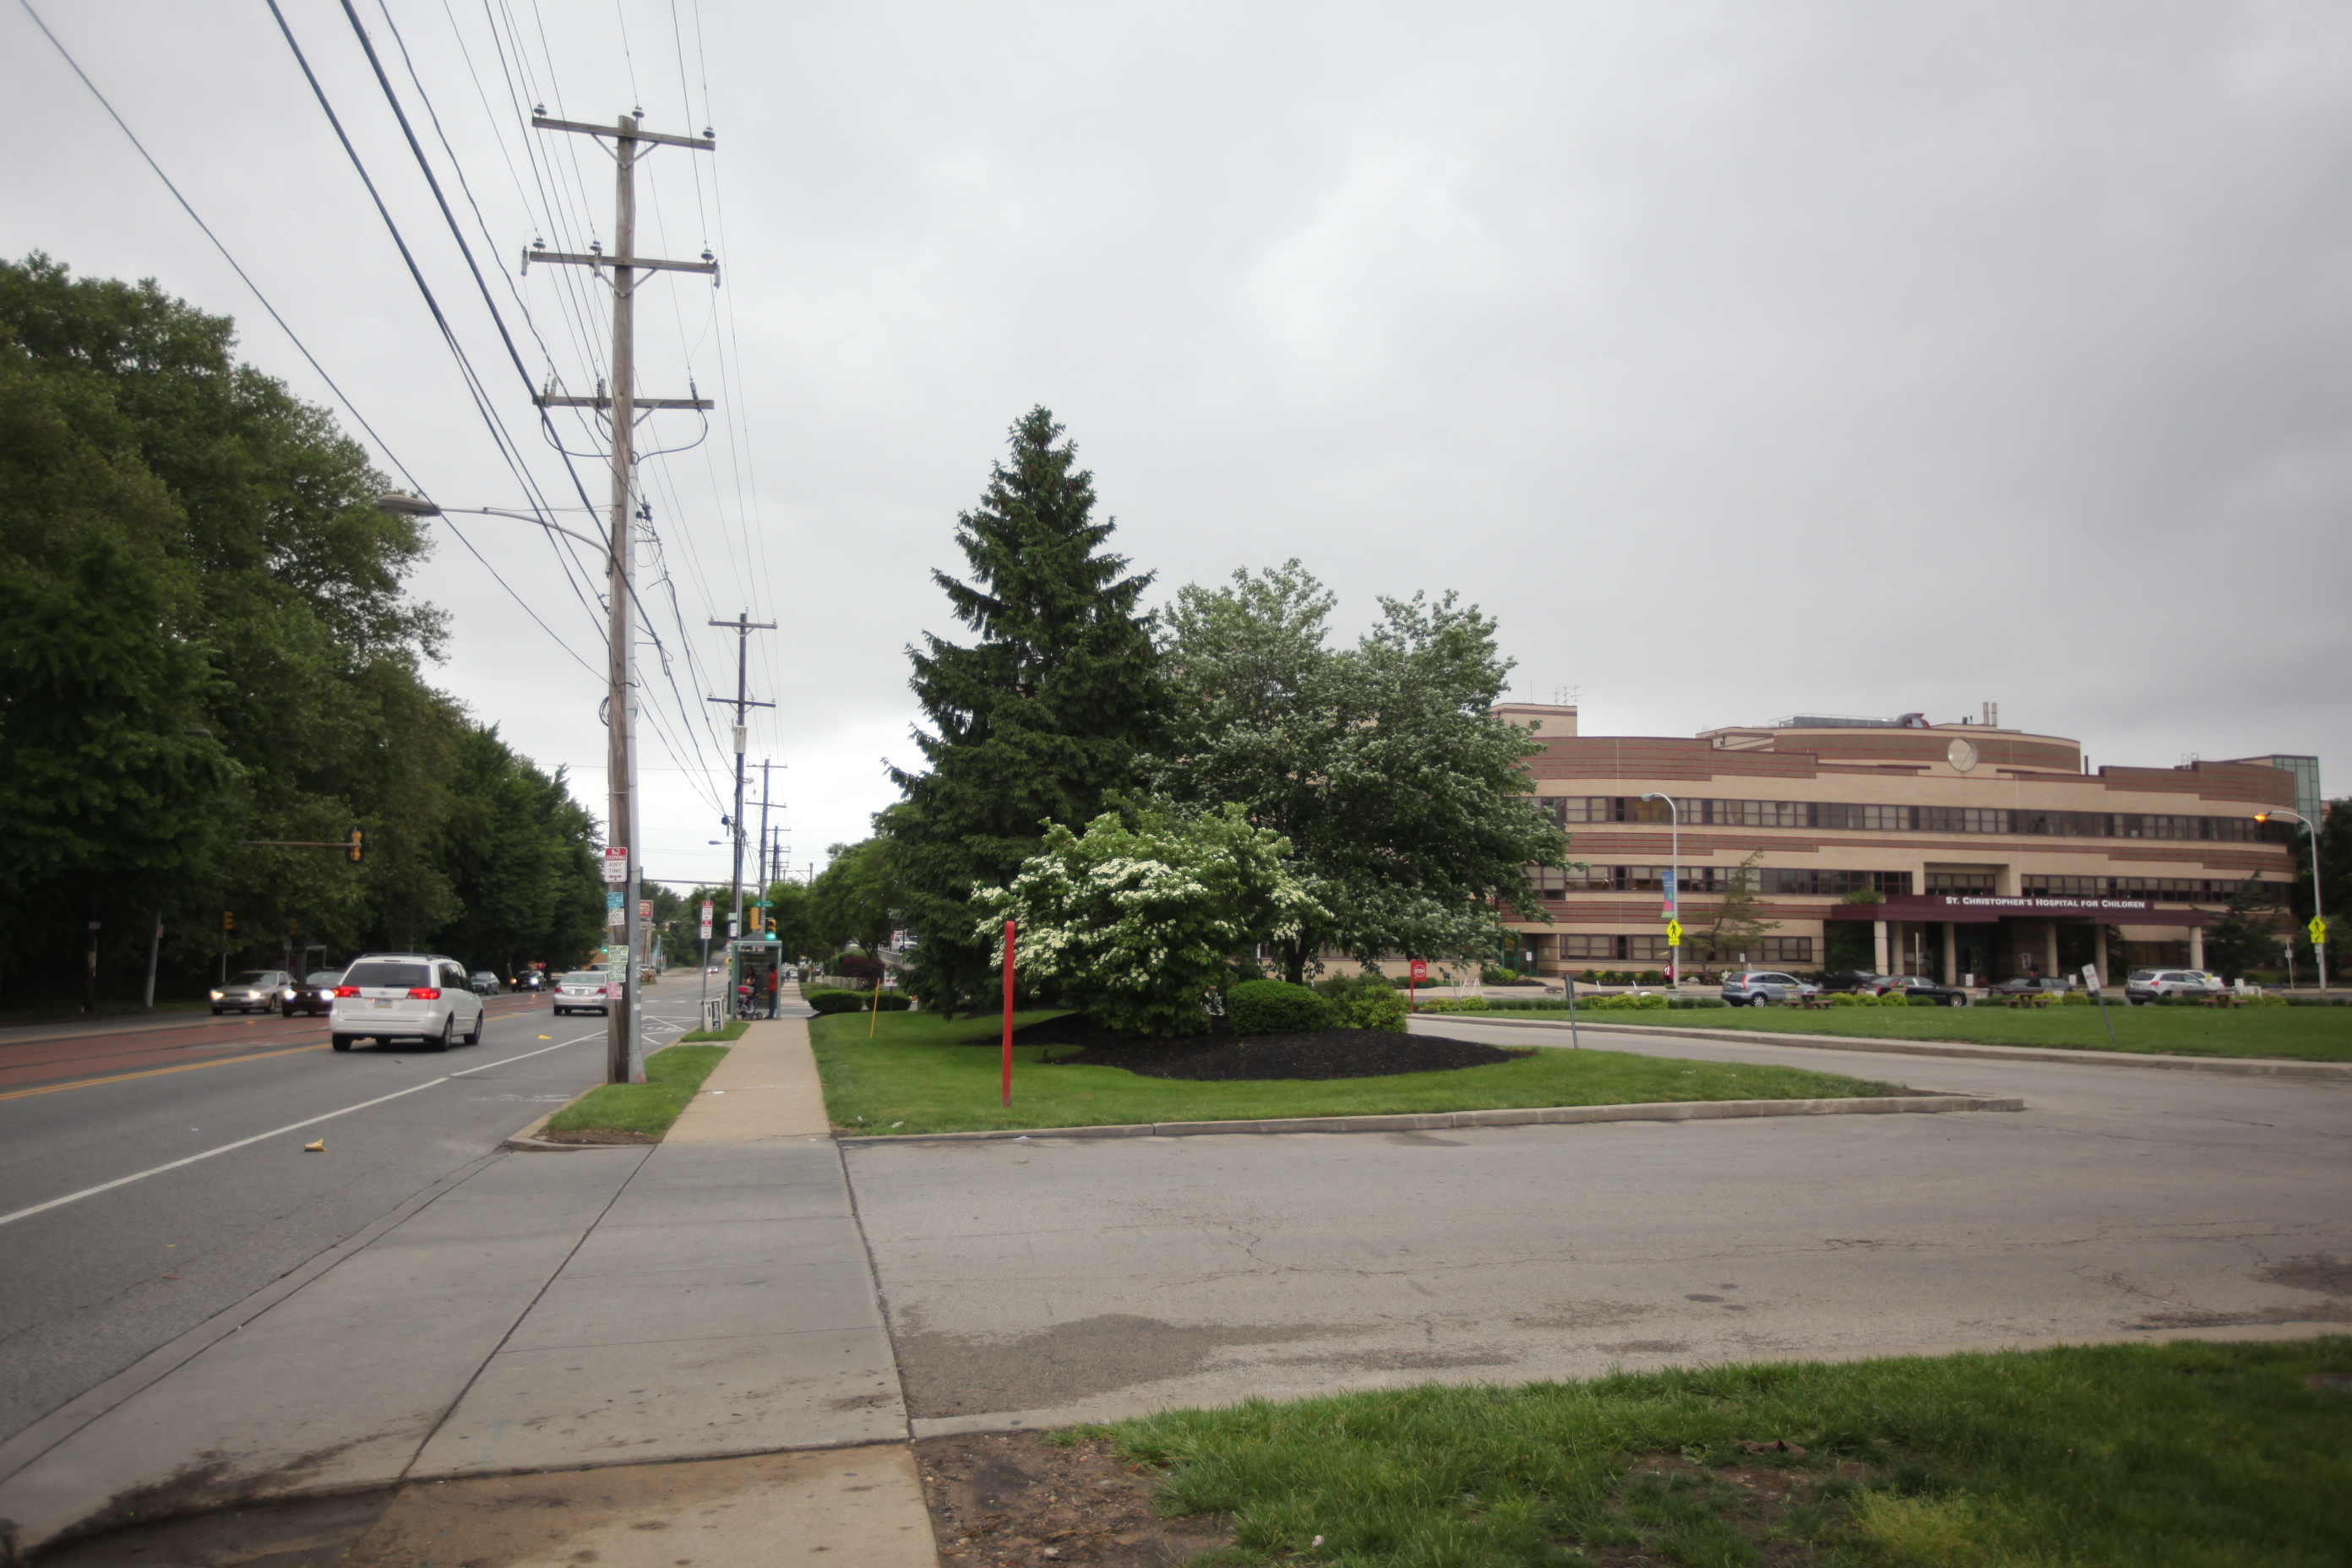 After Complete Streets review, MOTU asked St. Christopher's Hospital to make streetscape changes to its expansion project, Photos by Neal Santos